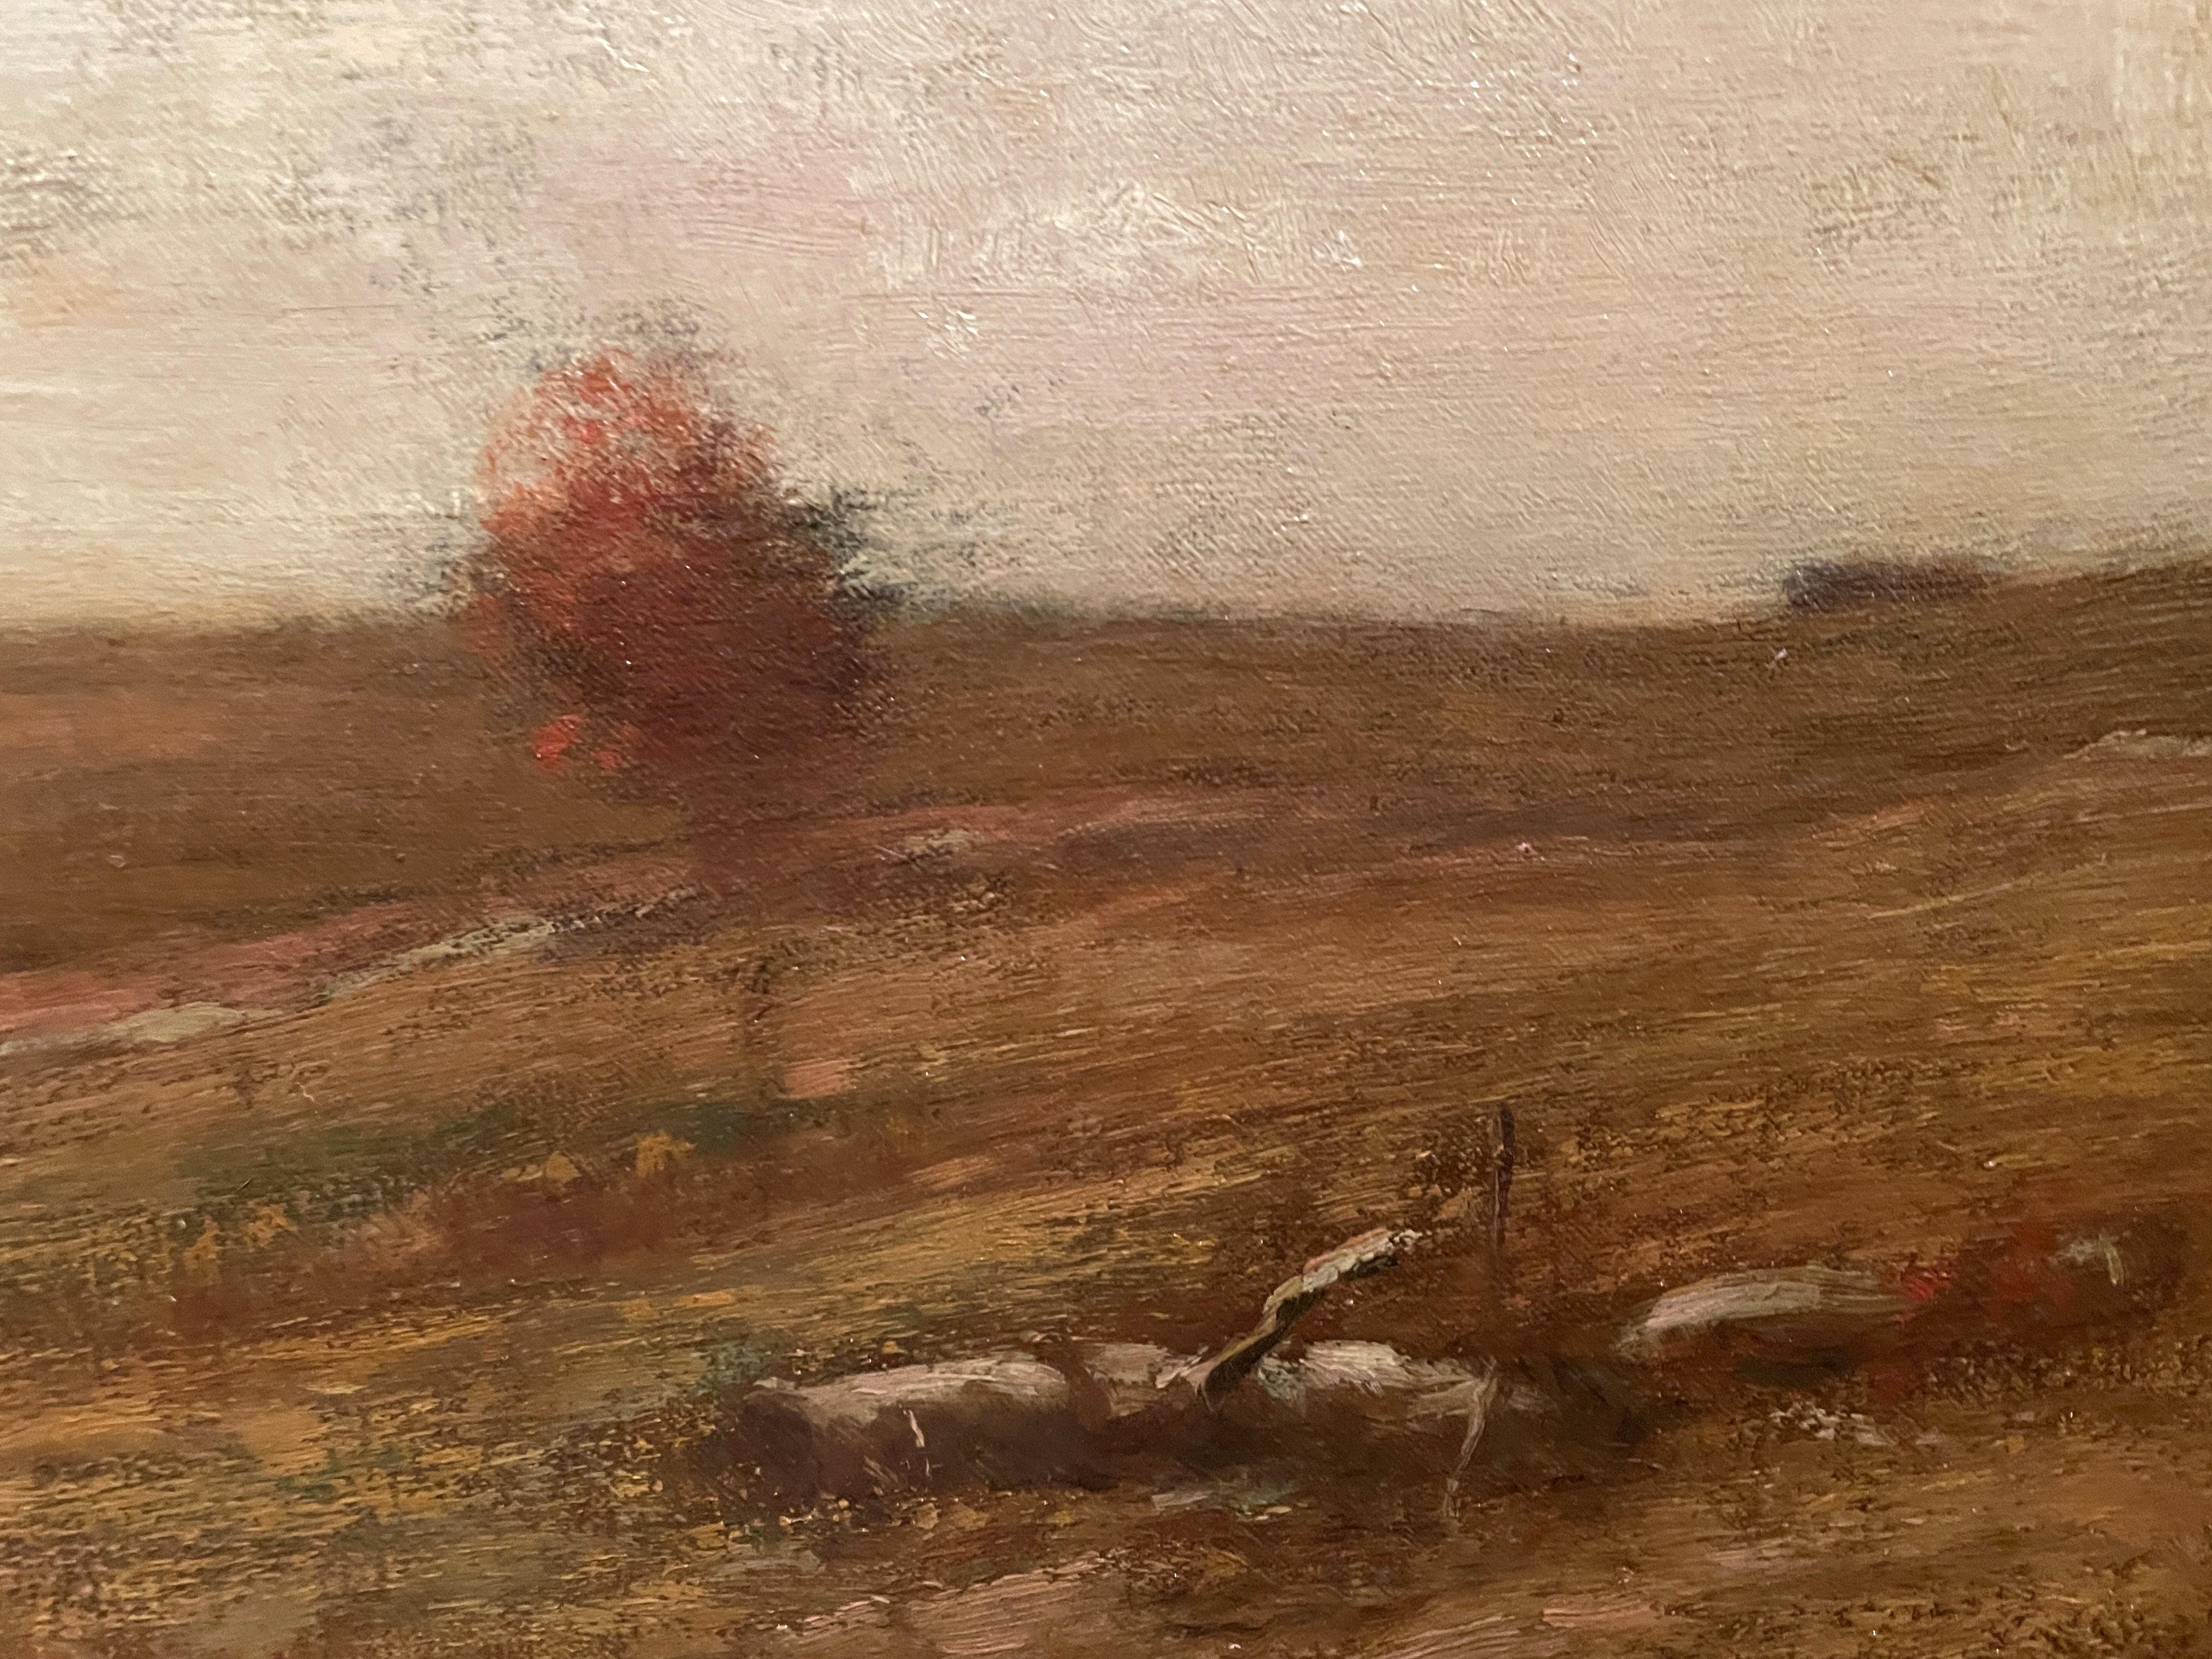 Bruce Crane (1857 - 1937)
November
Oil on canvas
25 x 30 inches
Signed lower right

Robert Bruce Crane was an American painter. He joined the Lyme Art Colony in the early 1900s. His most active period, though, came after 1920, when for more than a